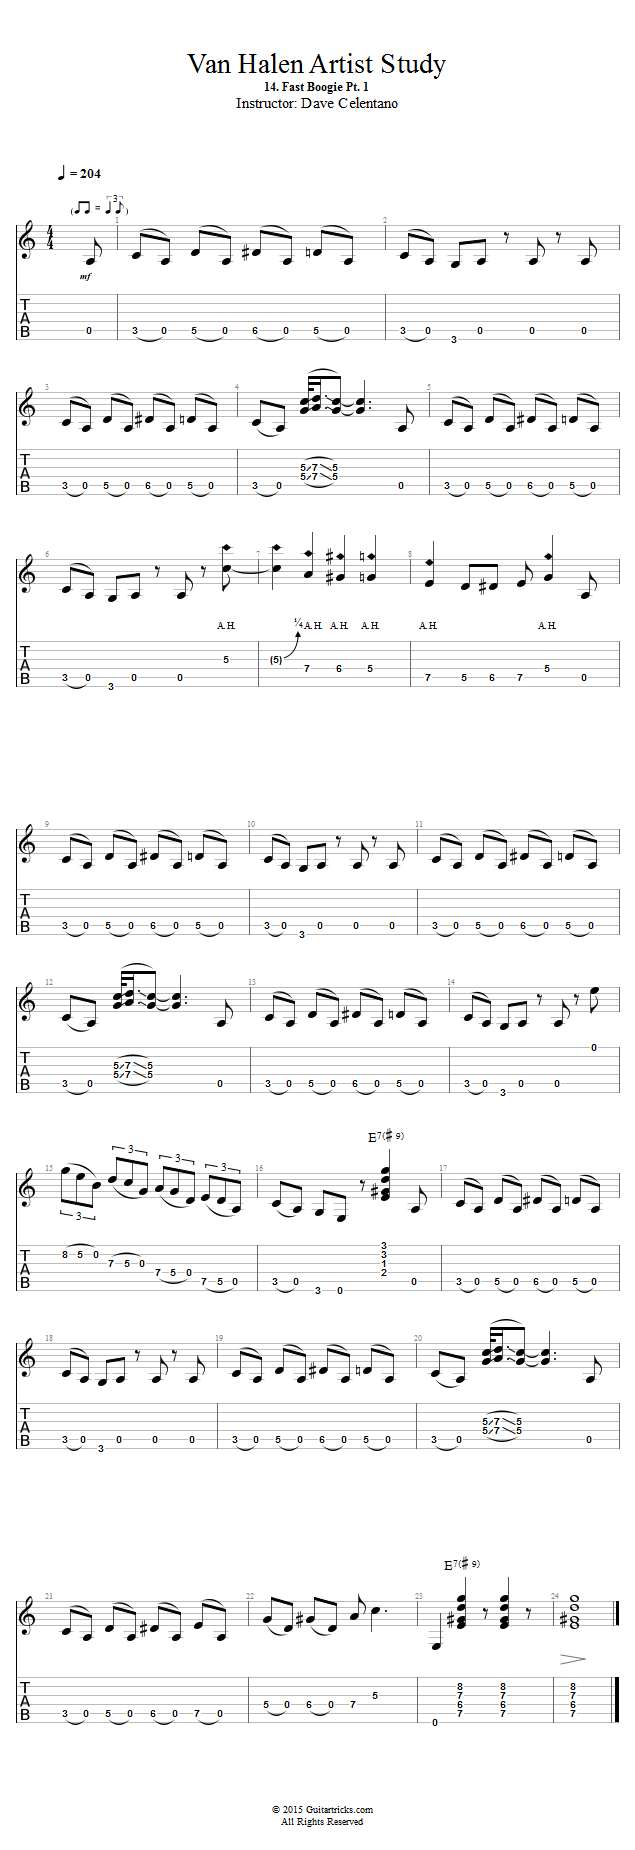 Fast Boogie Pt. 1 song notation